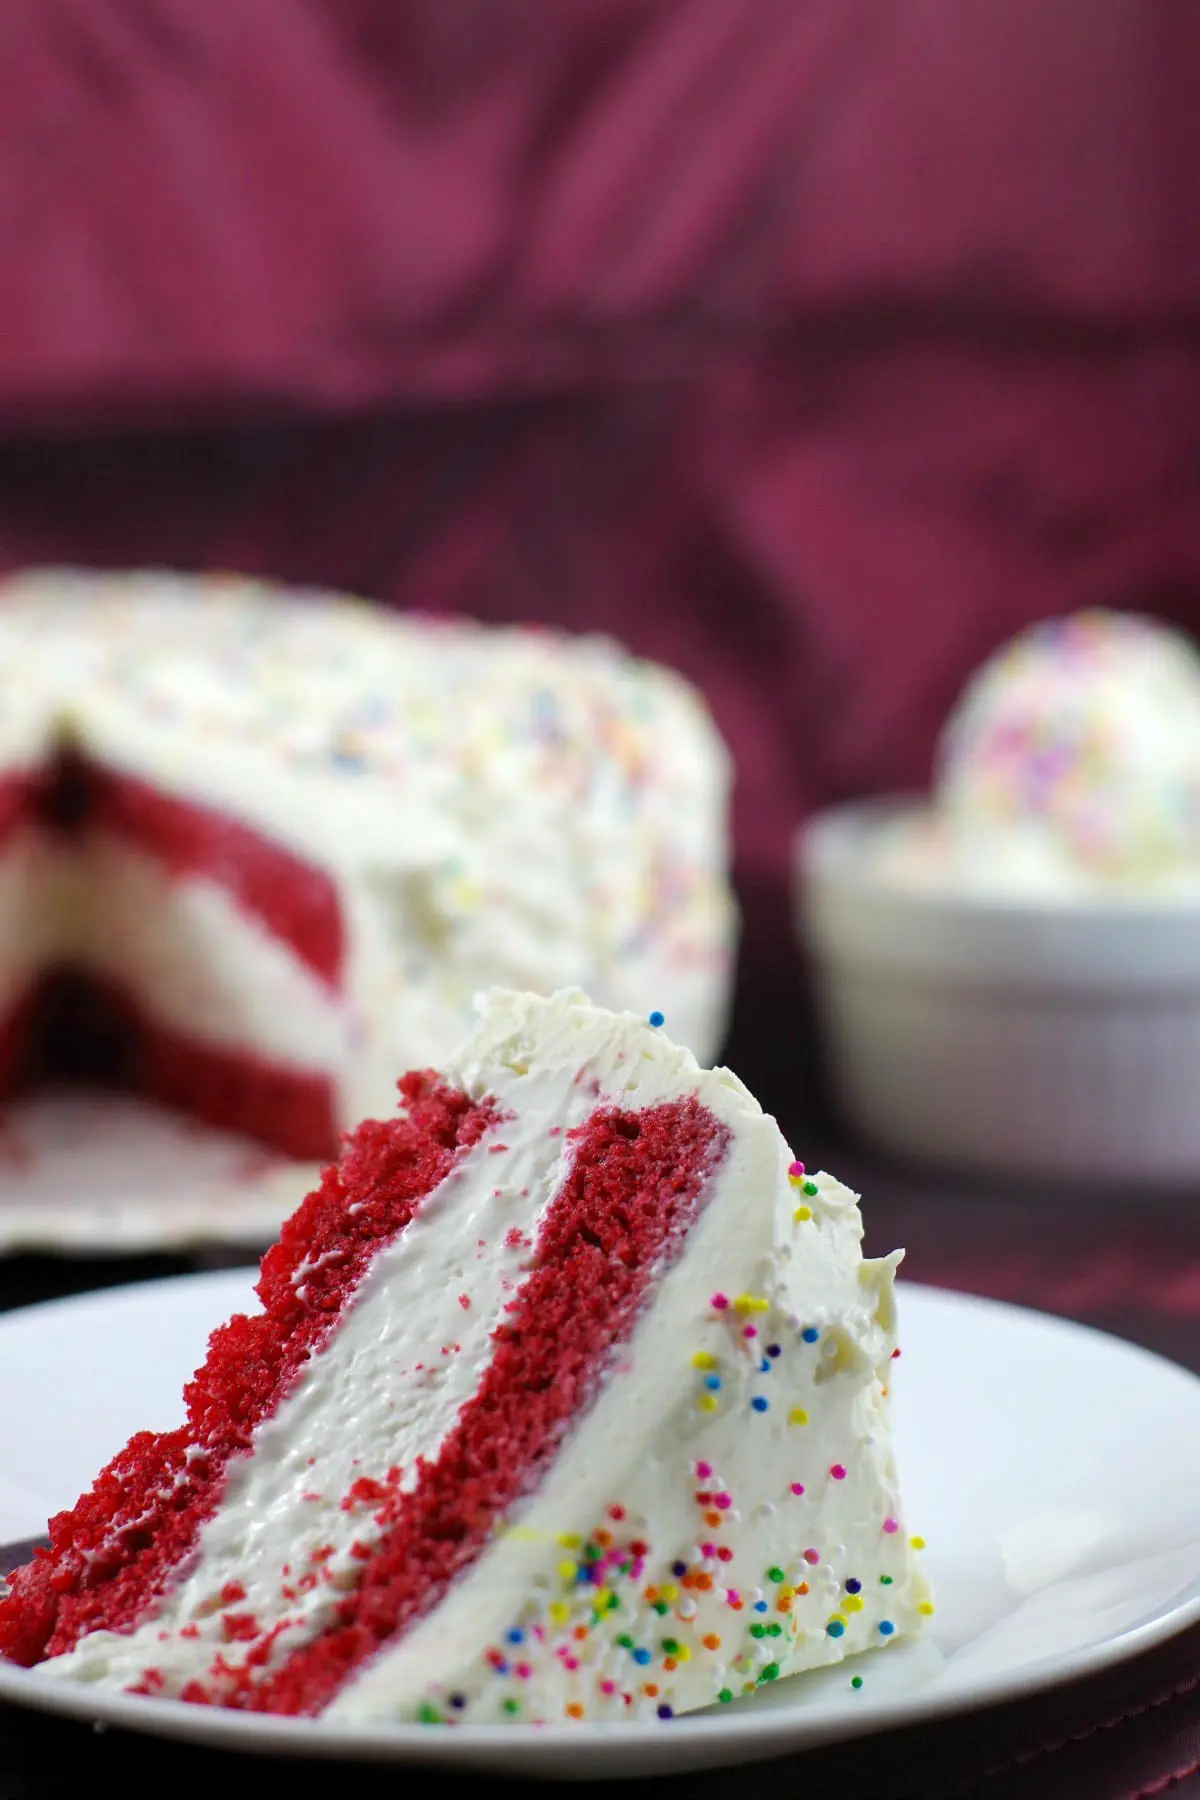 Slice of red velvet ice cream cake with whole cake in the background and a bowl of no churn ice cream